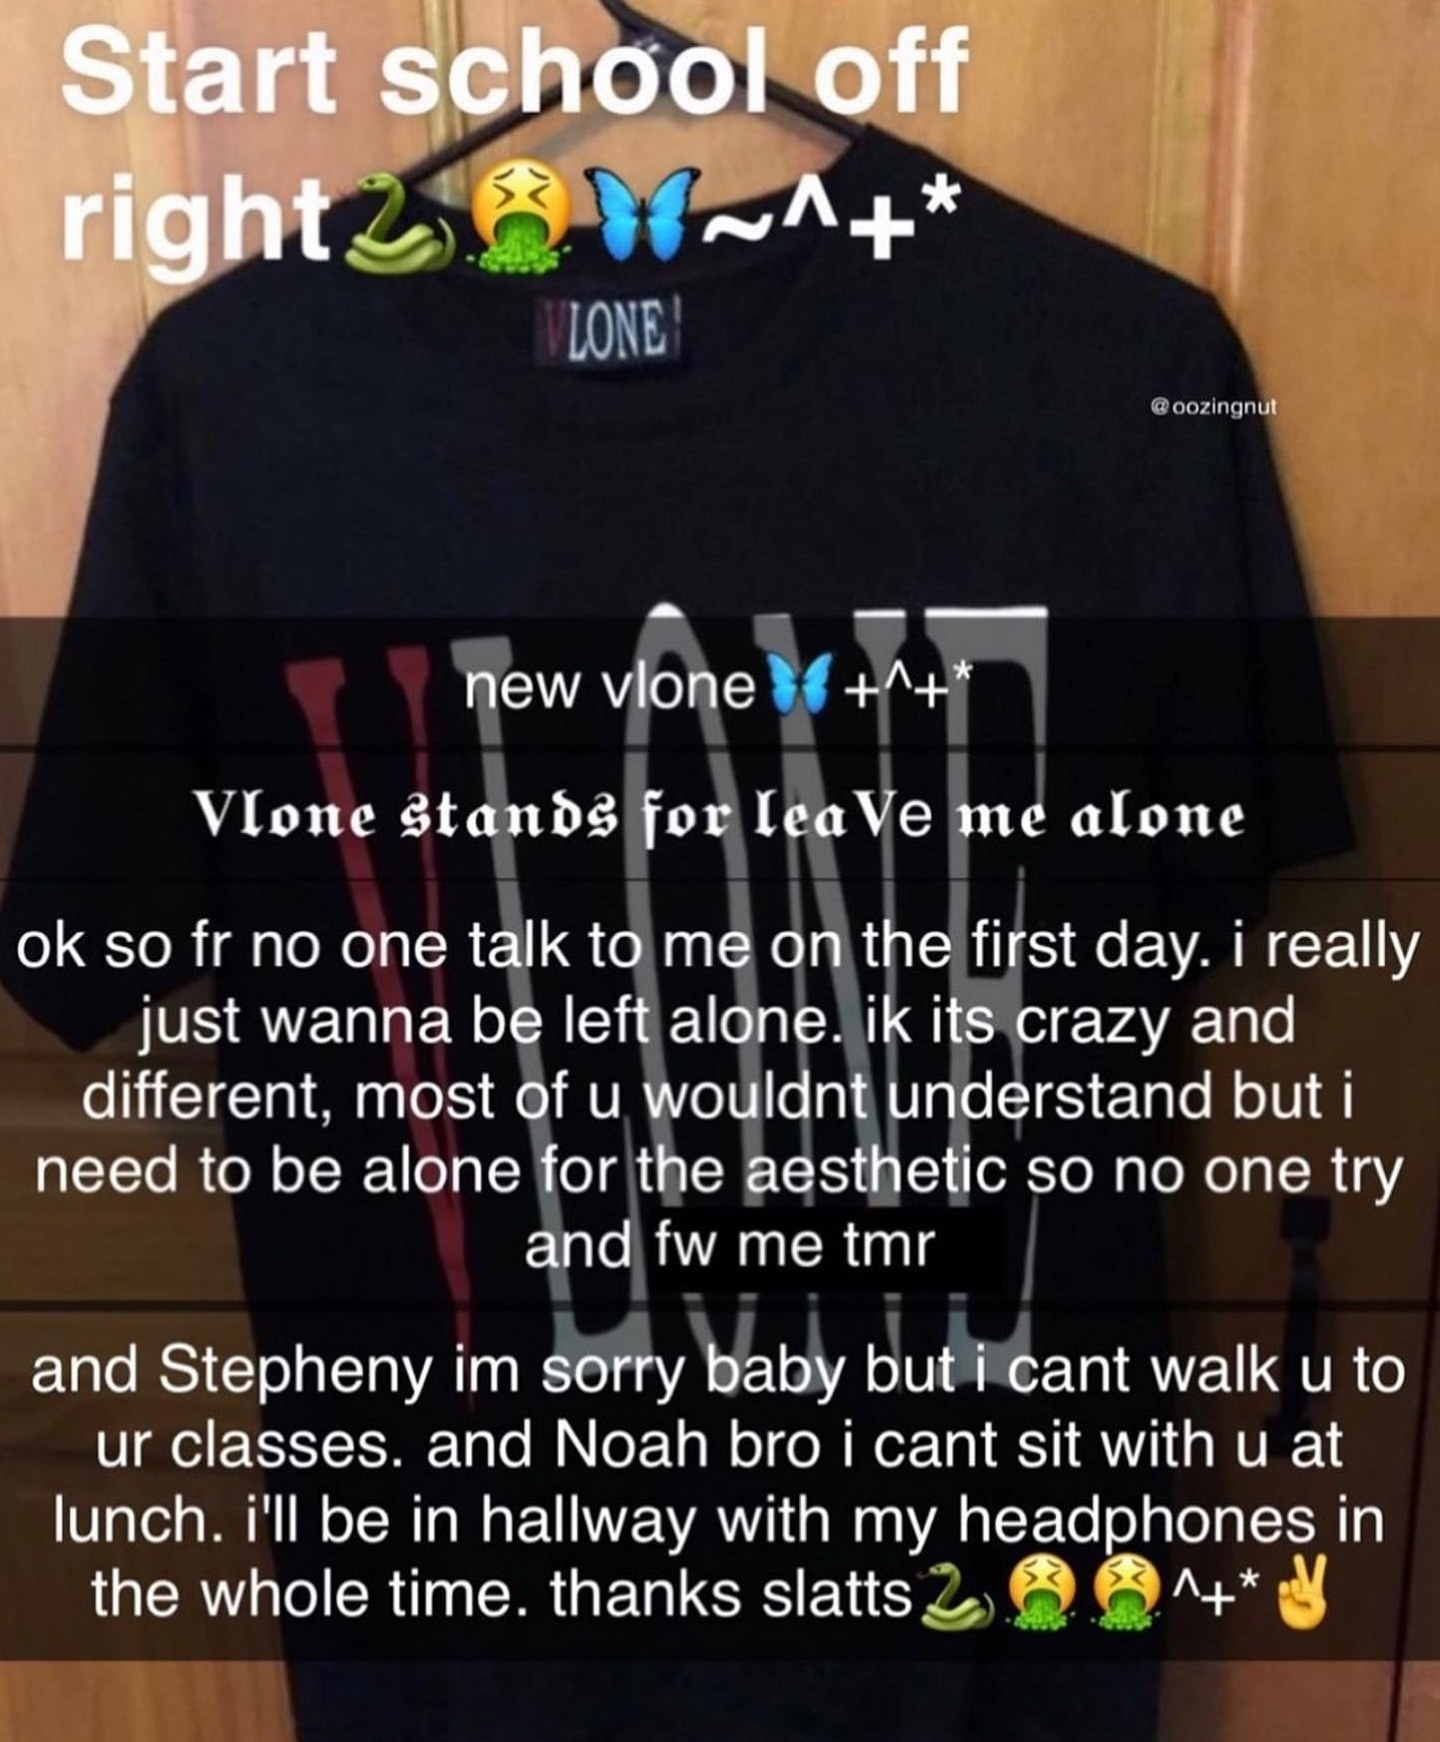 Person posts a shirt and says &quot;No one talk to me on the first day, I really just wanna be left alone; I know it&#x27;s crazy and different, most of you wouldn&#x27;t understand, but I need to be alone for the aesthetic&quot;